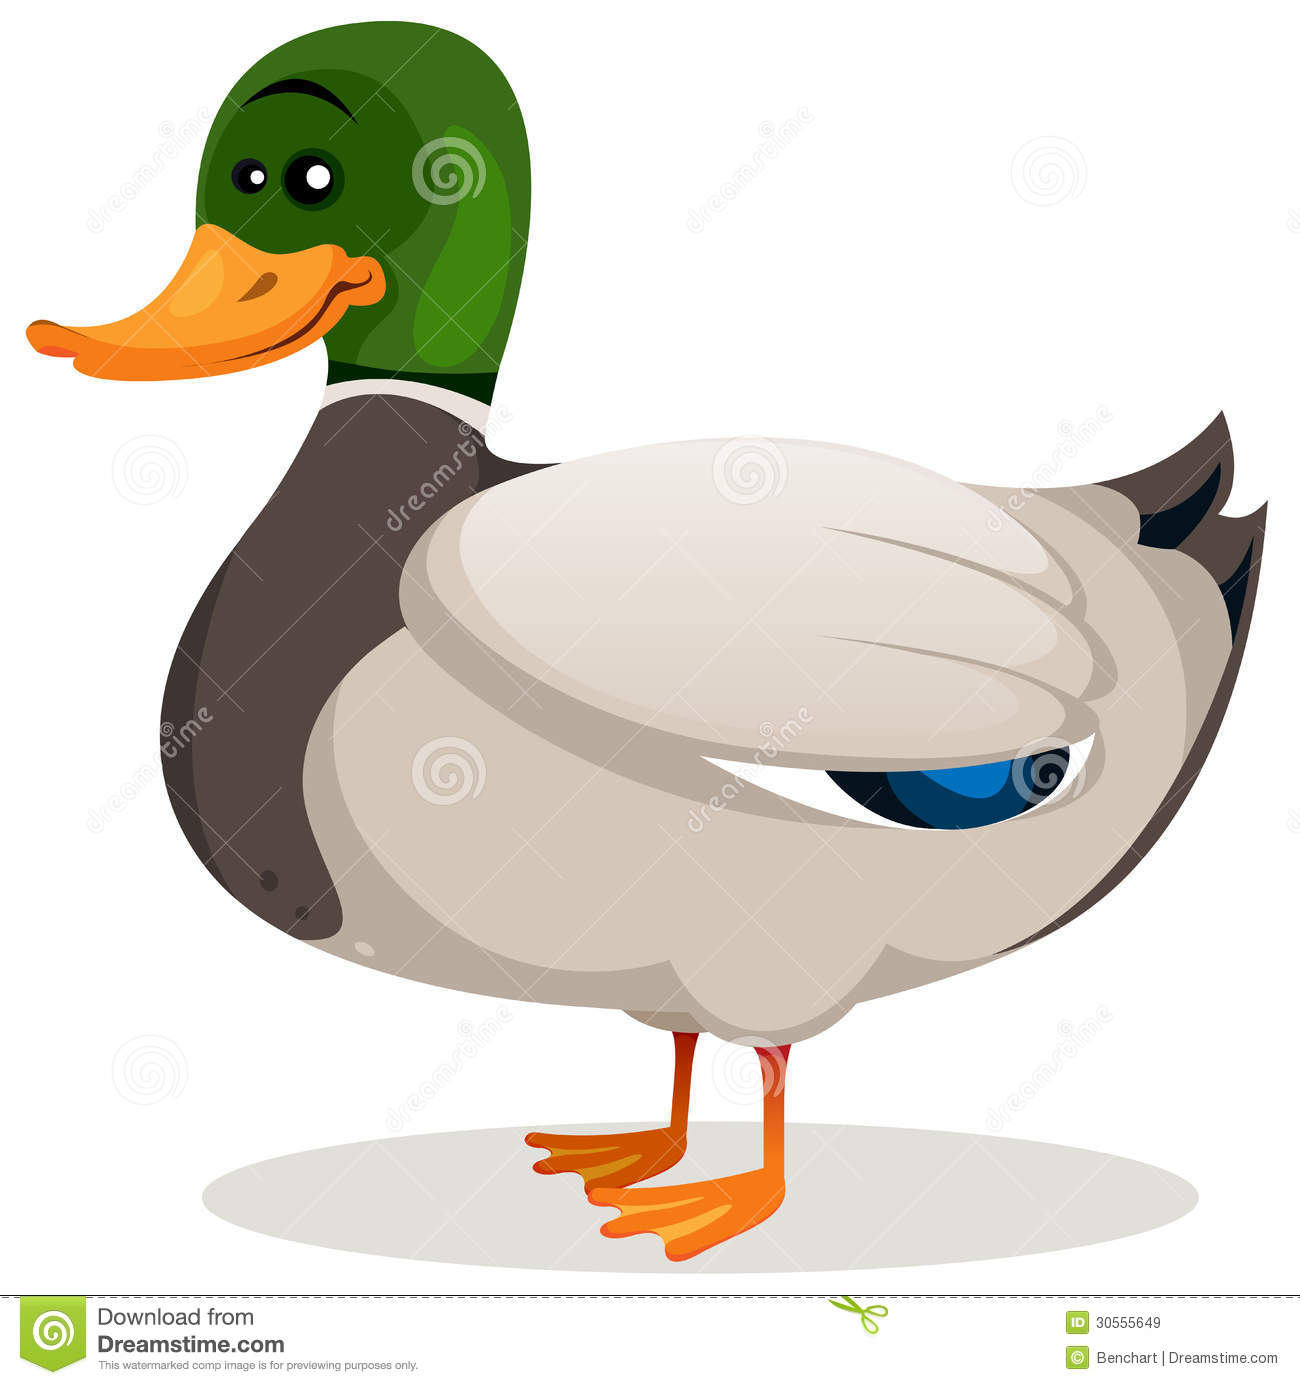 Illustration Of A Cartoon Mallard Duck With Green Neck And Grey